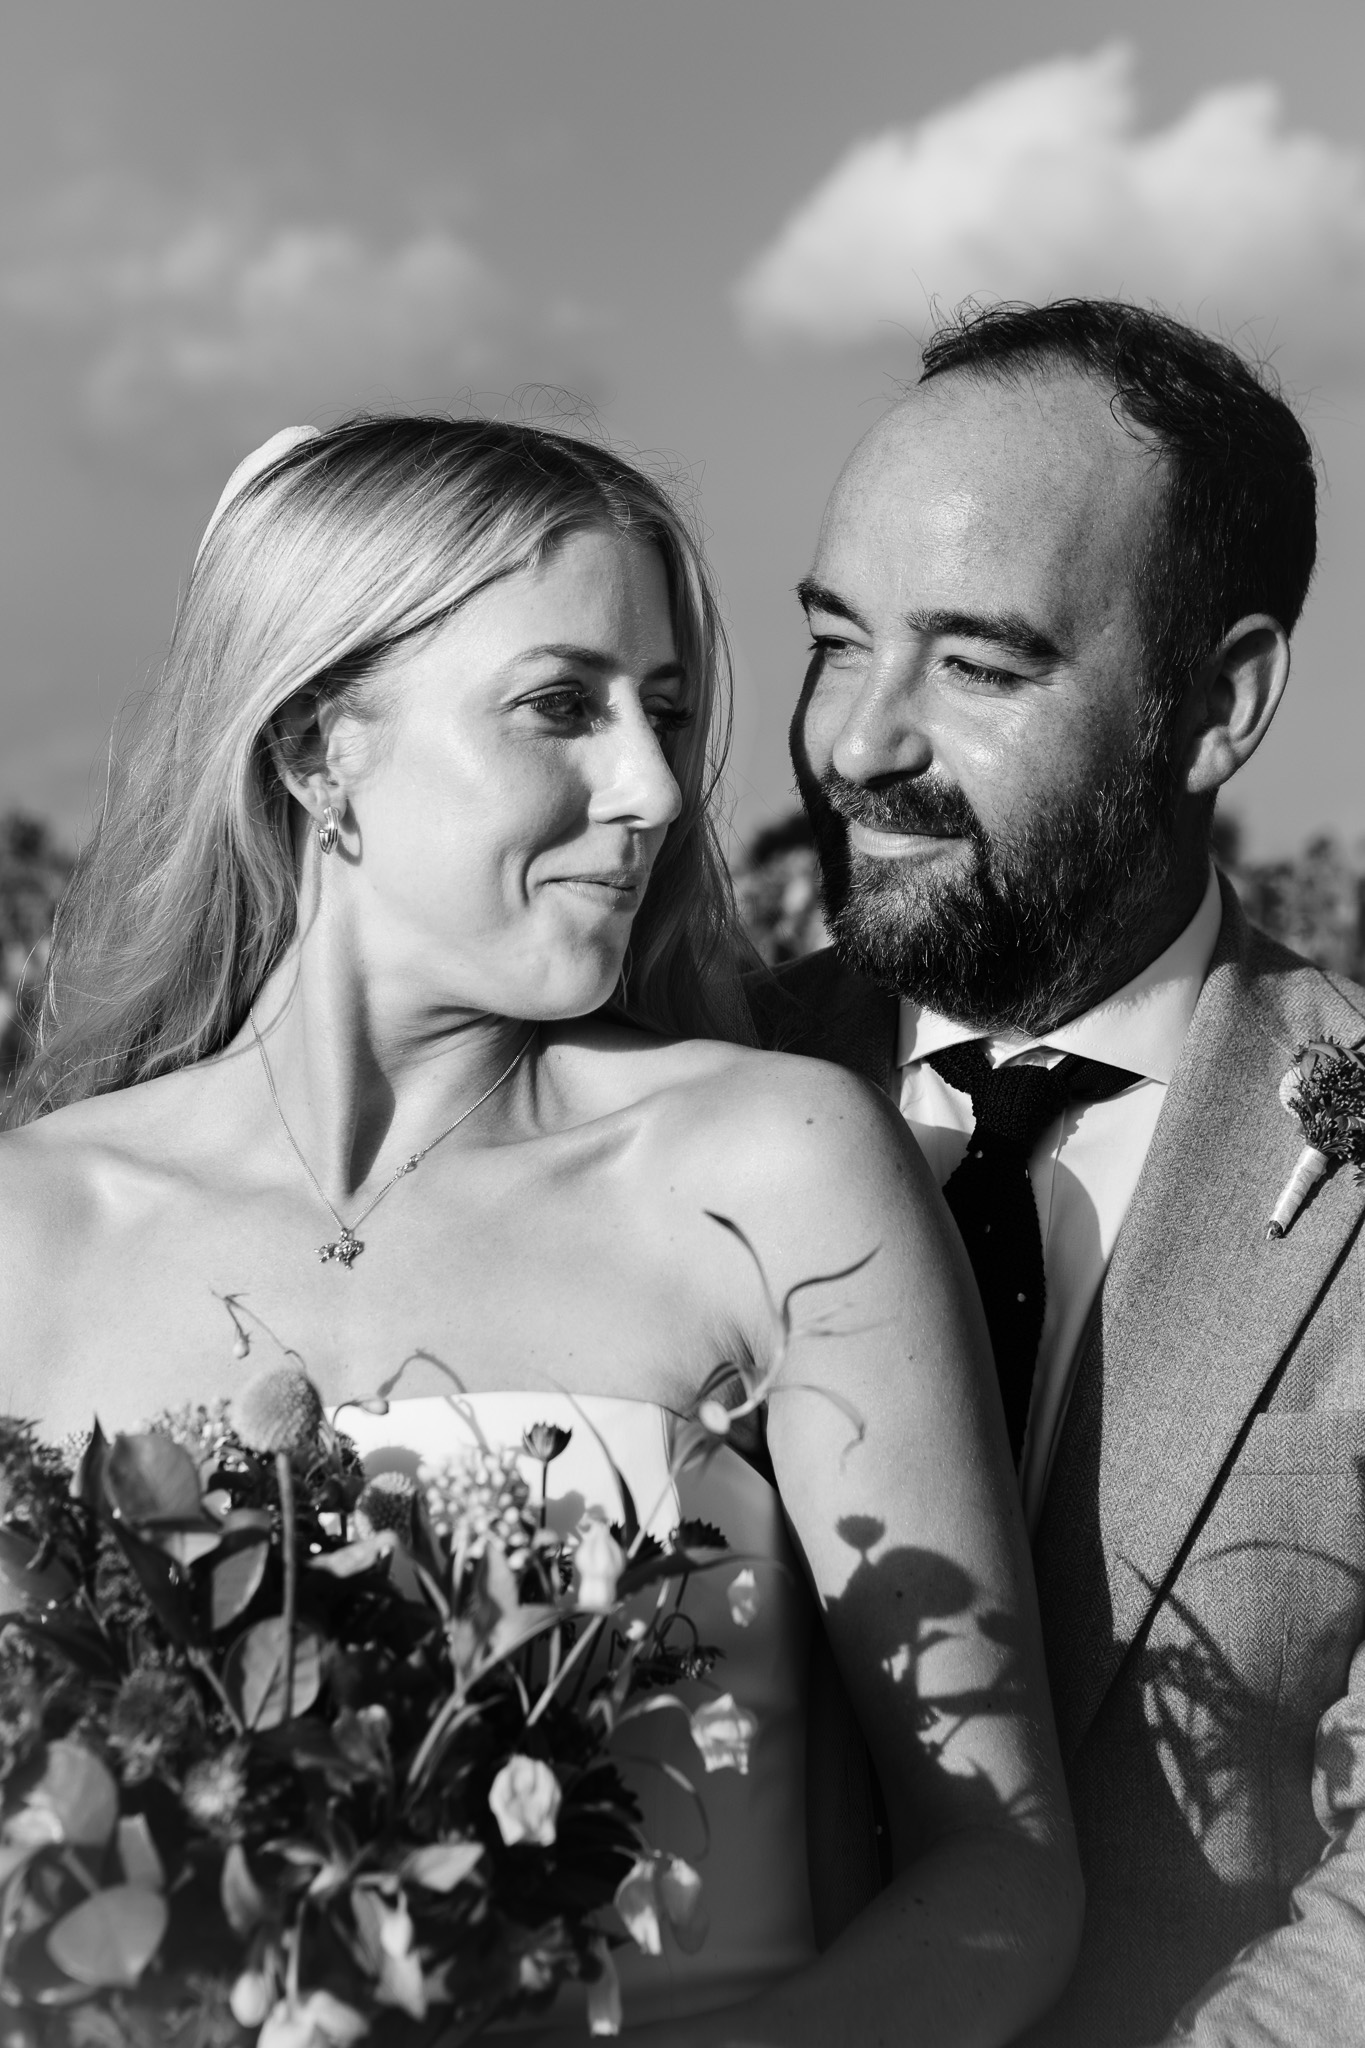 Alice and Tom look and smile at each other during a couples photo session during their wedding day